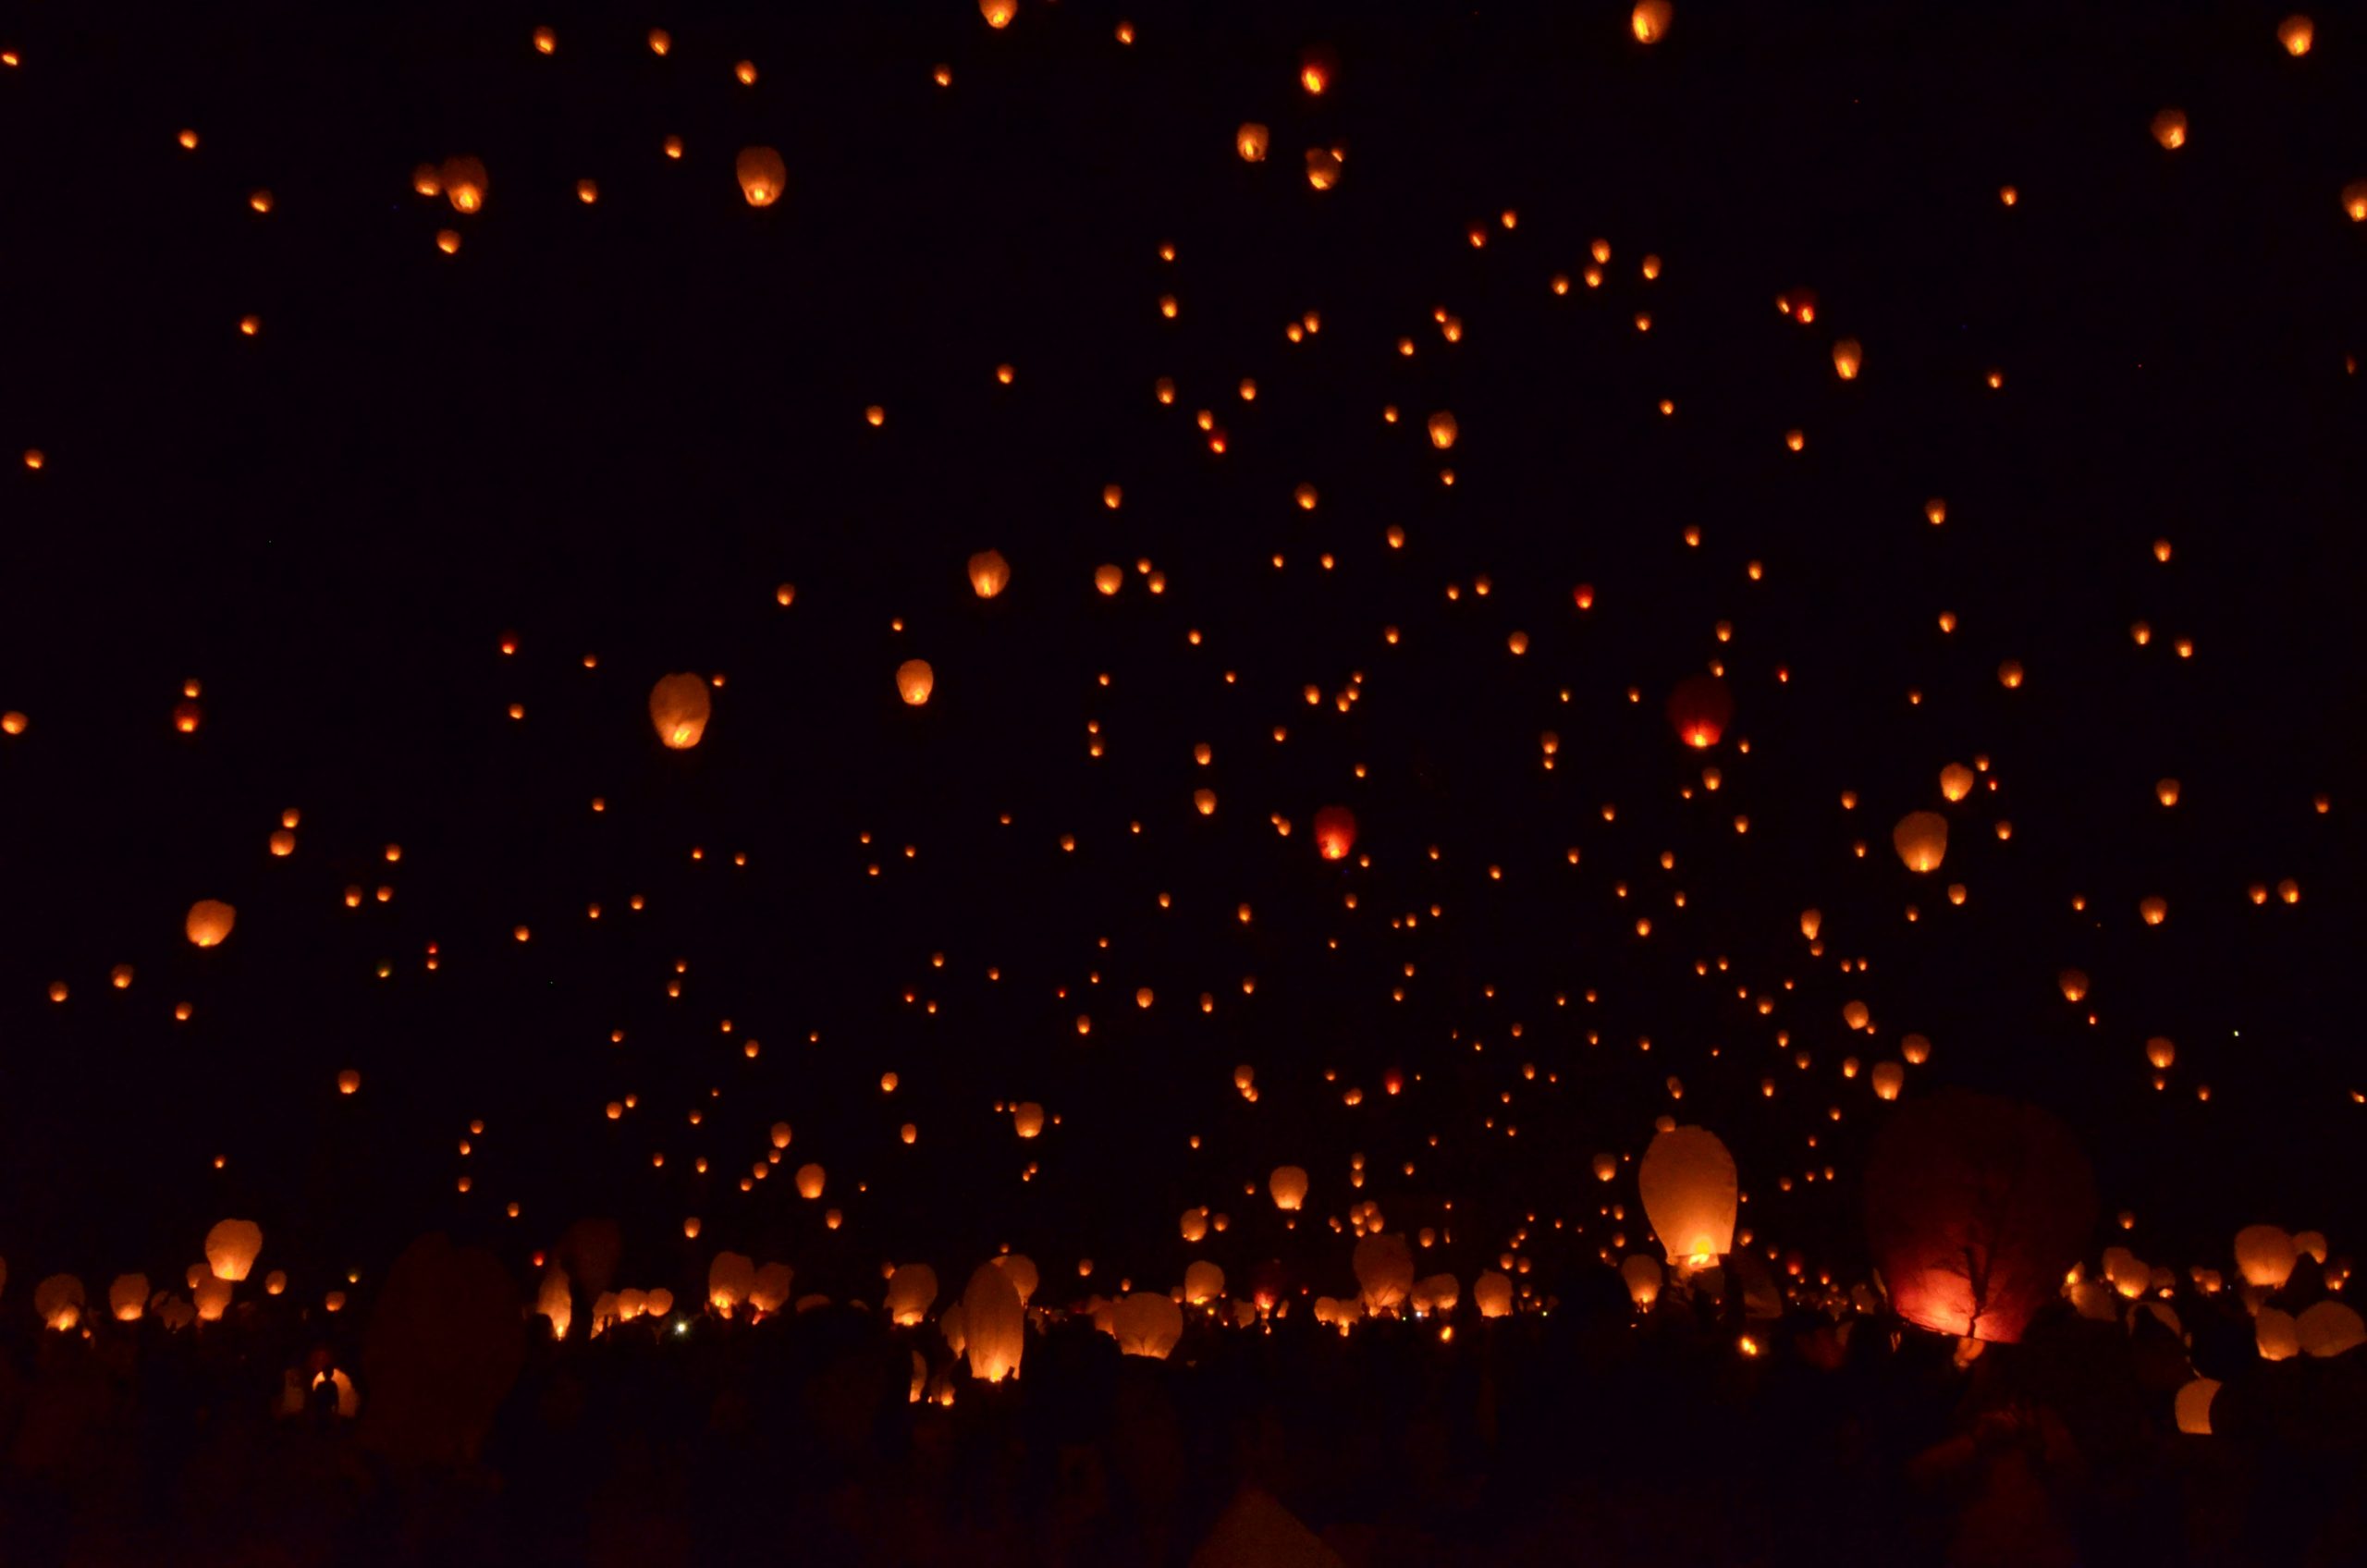 Beautiful night sky with paper lanterns floating